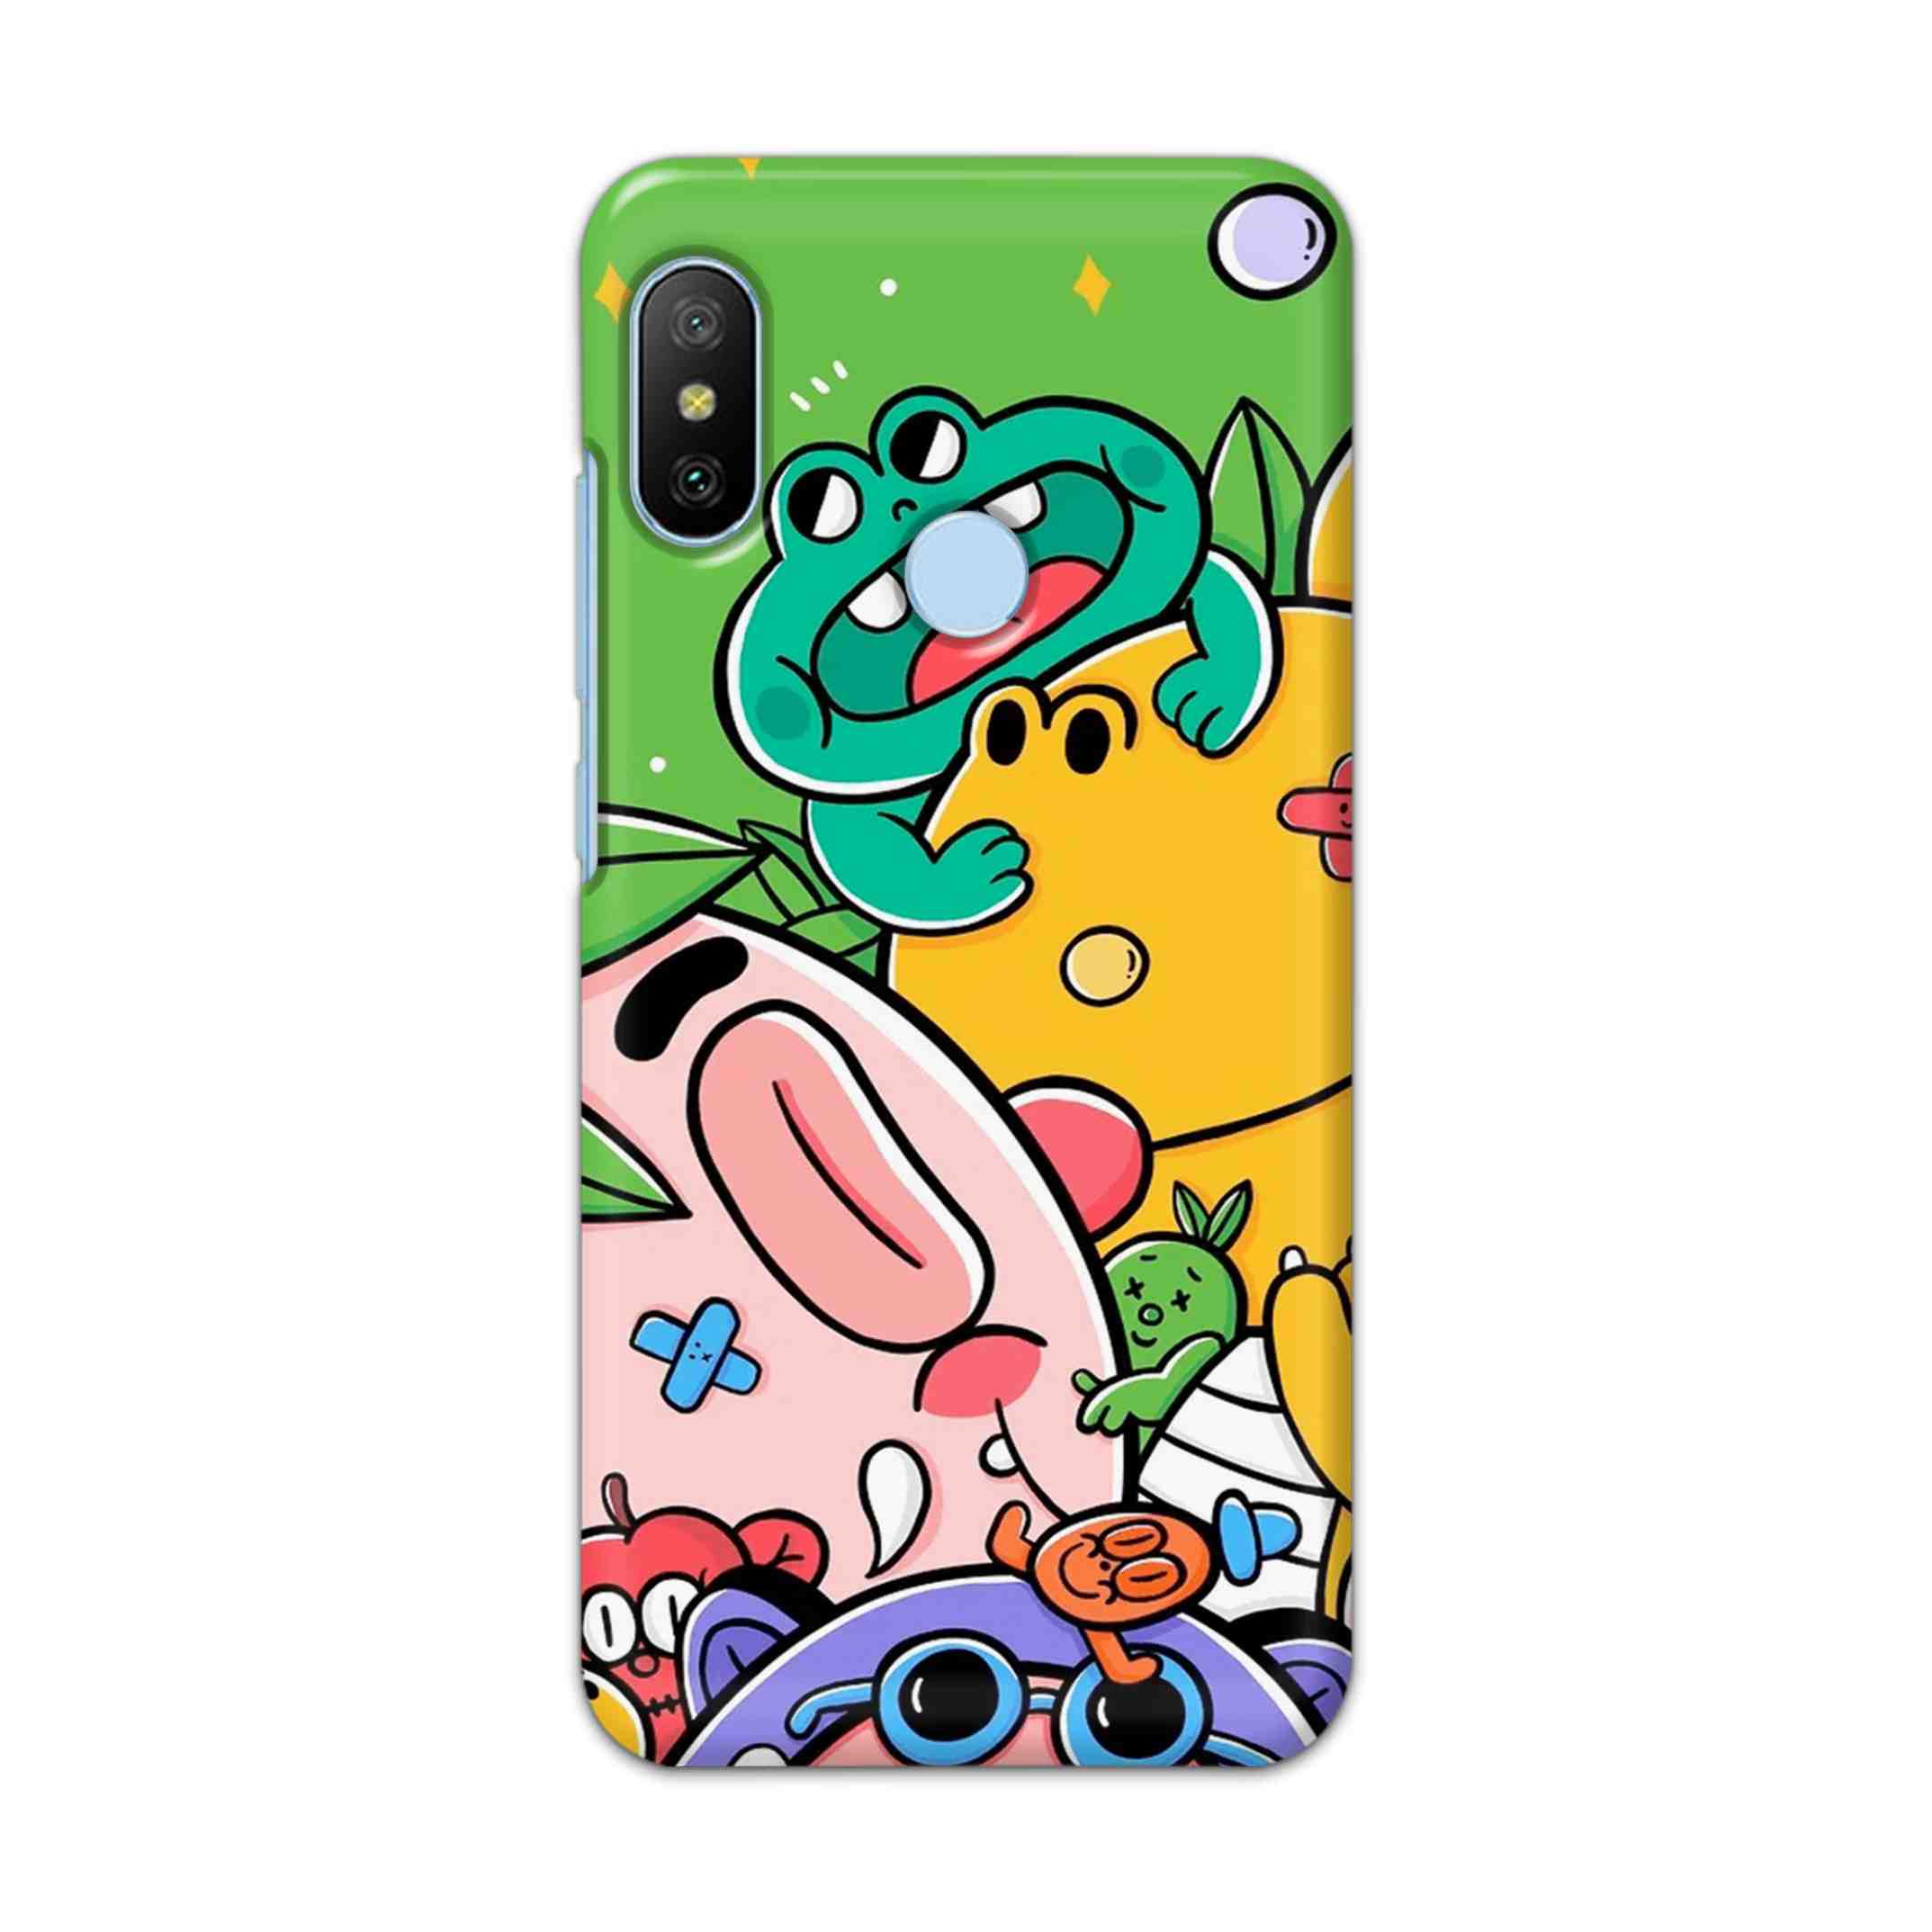 Buy Hello Feng San Hard Back Mobile Phone Case/Cover For Xiaomi Redmi 6 Pro Online